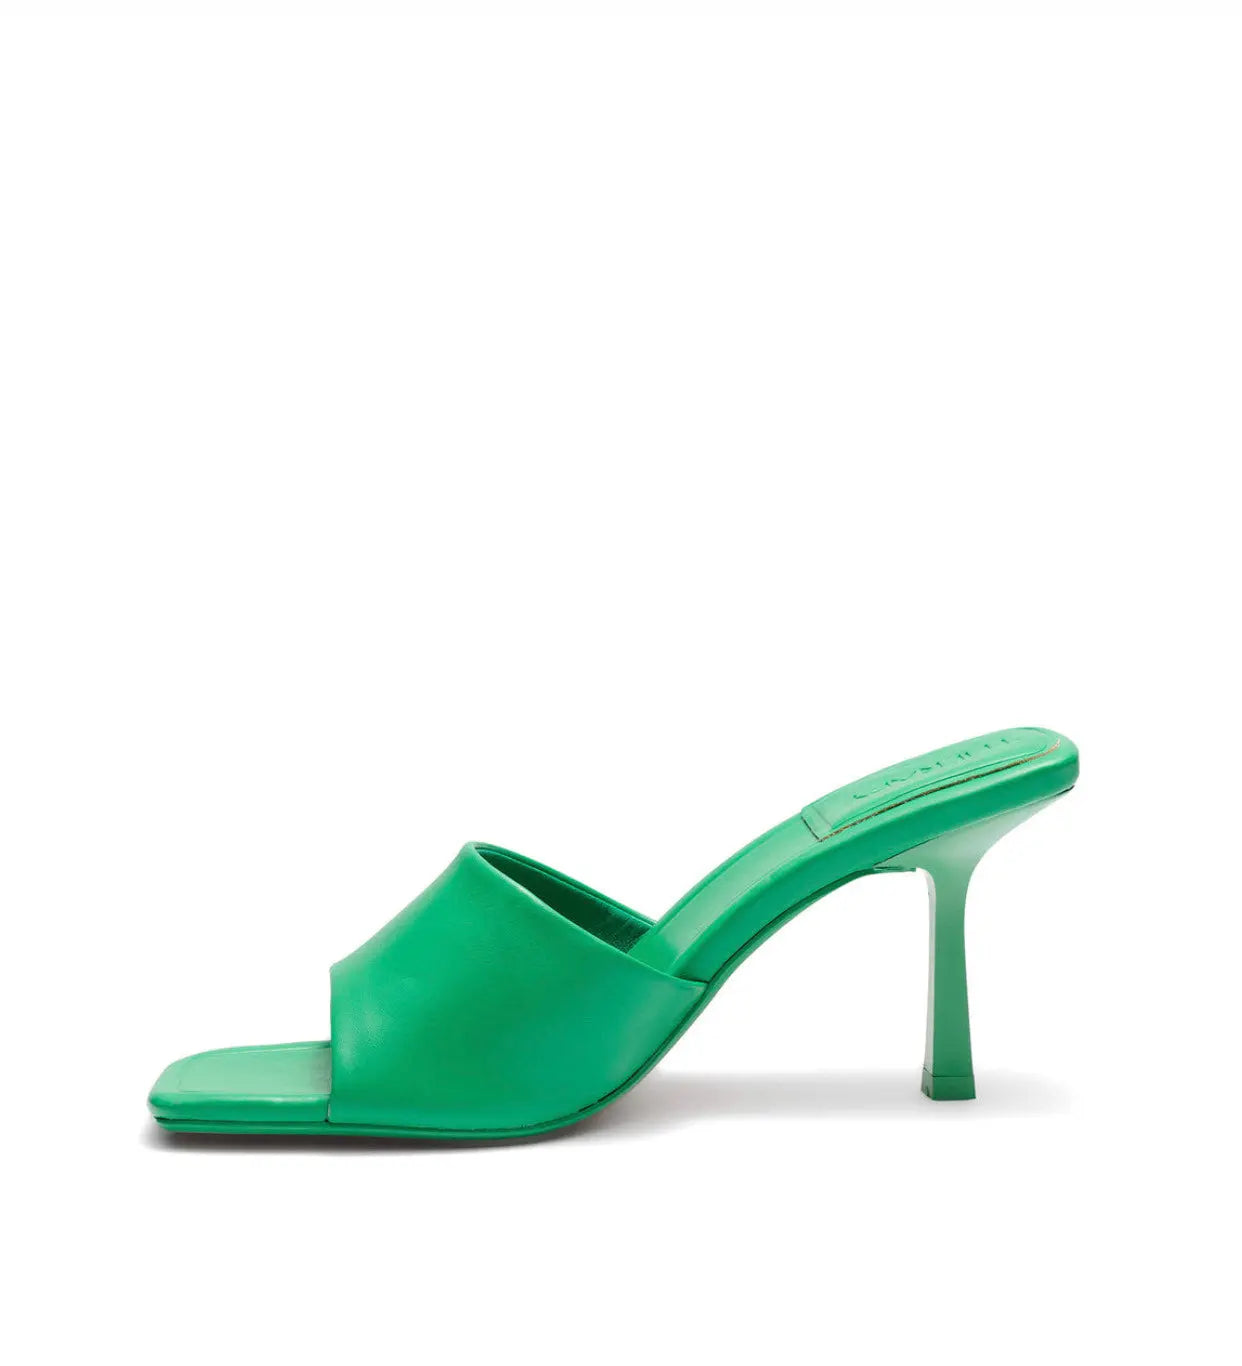 DIONNE FERN HEELS | GREEN THERAPY